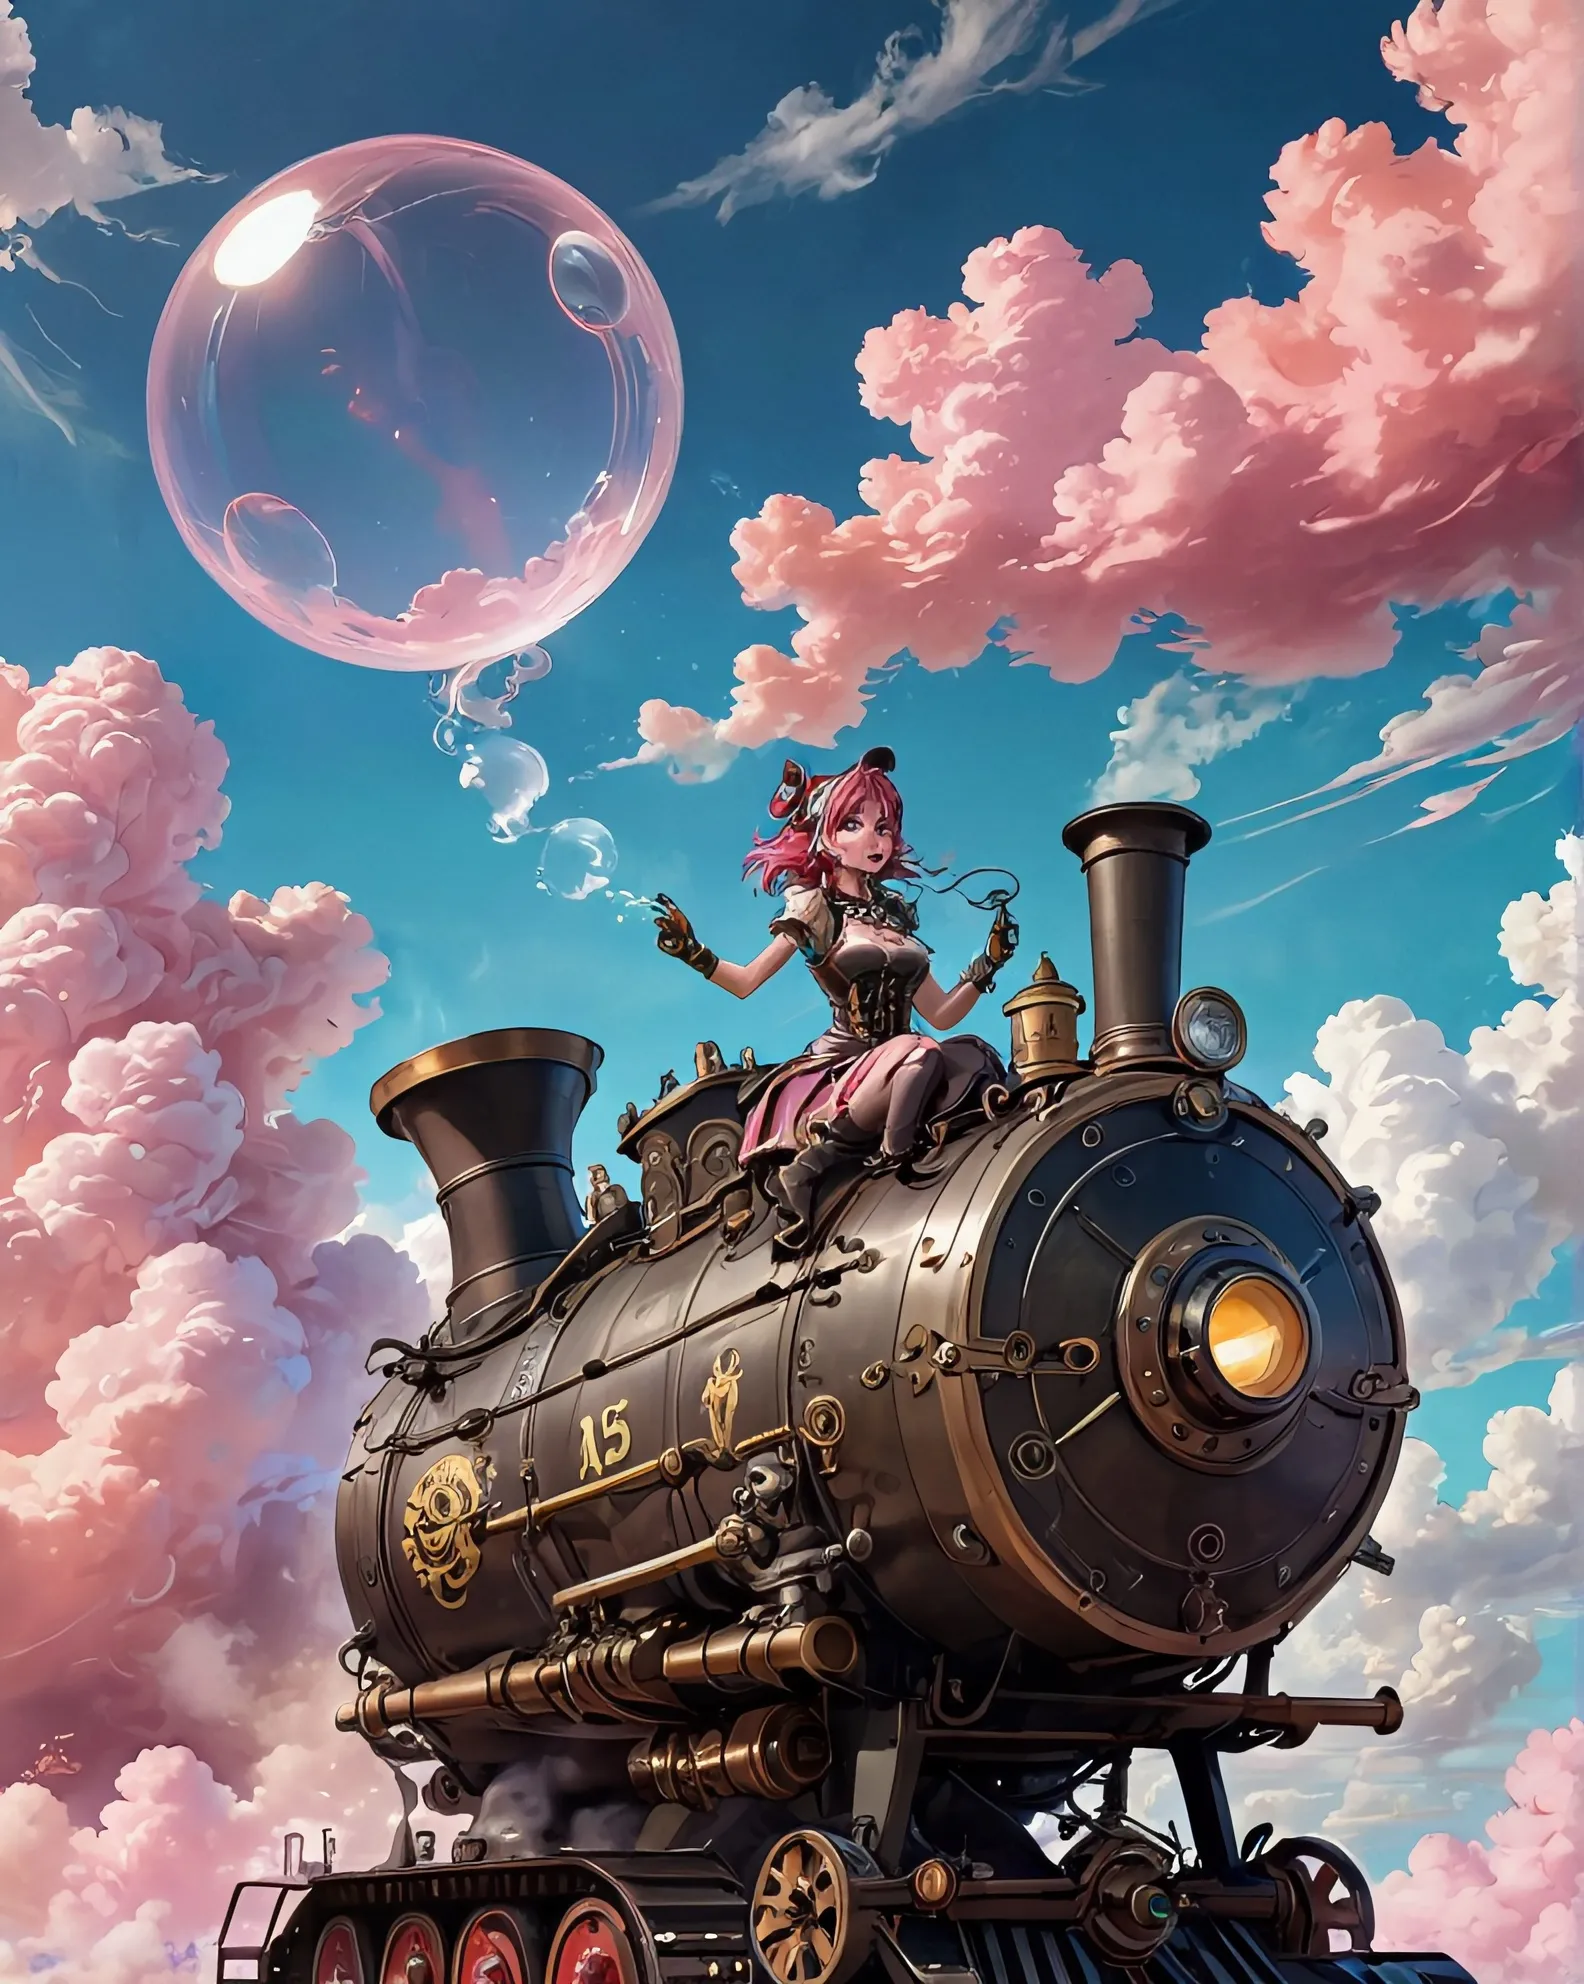 steam punk with an attitude, steam engine through the skies.  blowing huge bubble from mouth. Pink fluffy clouds